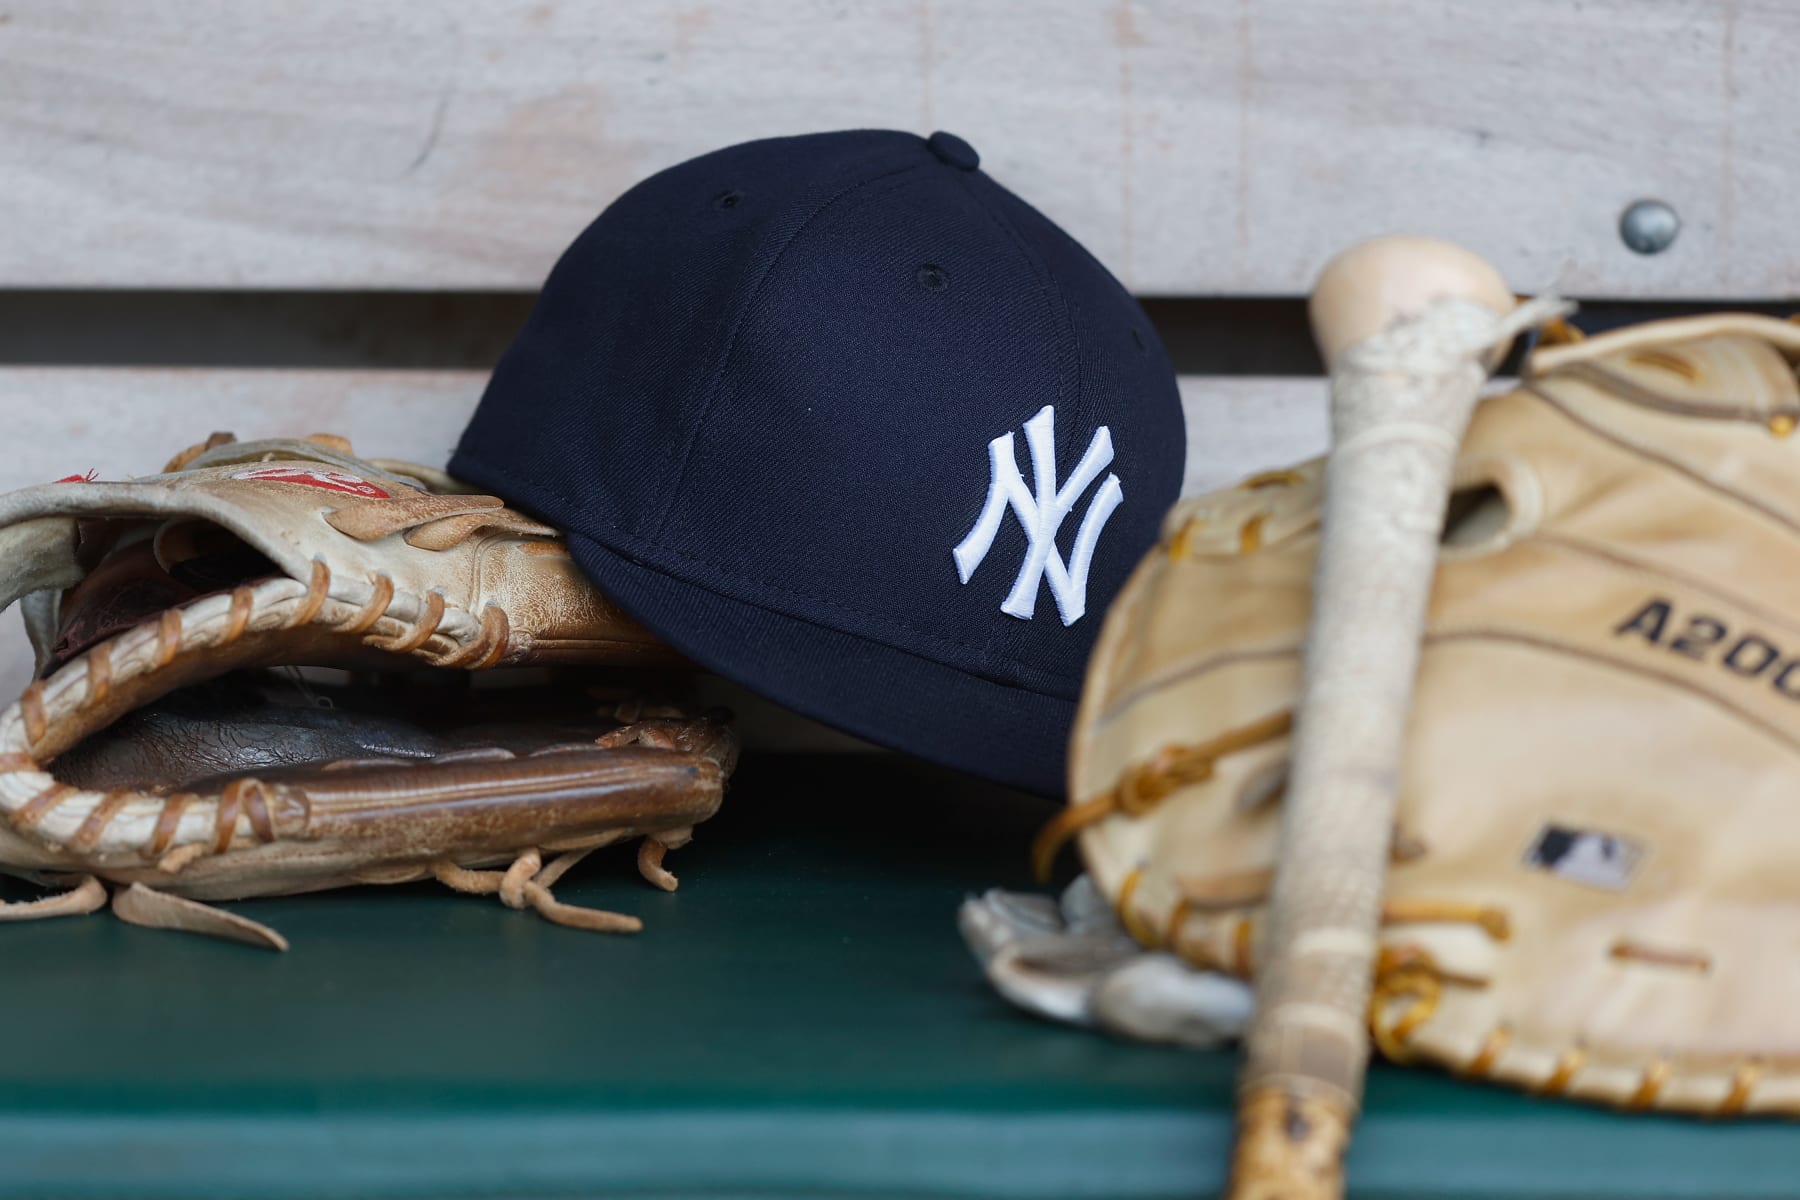 Yankees rumors: 3 catchers to trade for to replace Jose Trevino